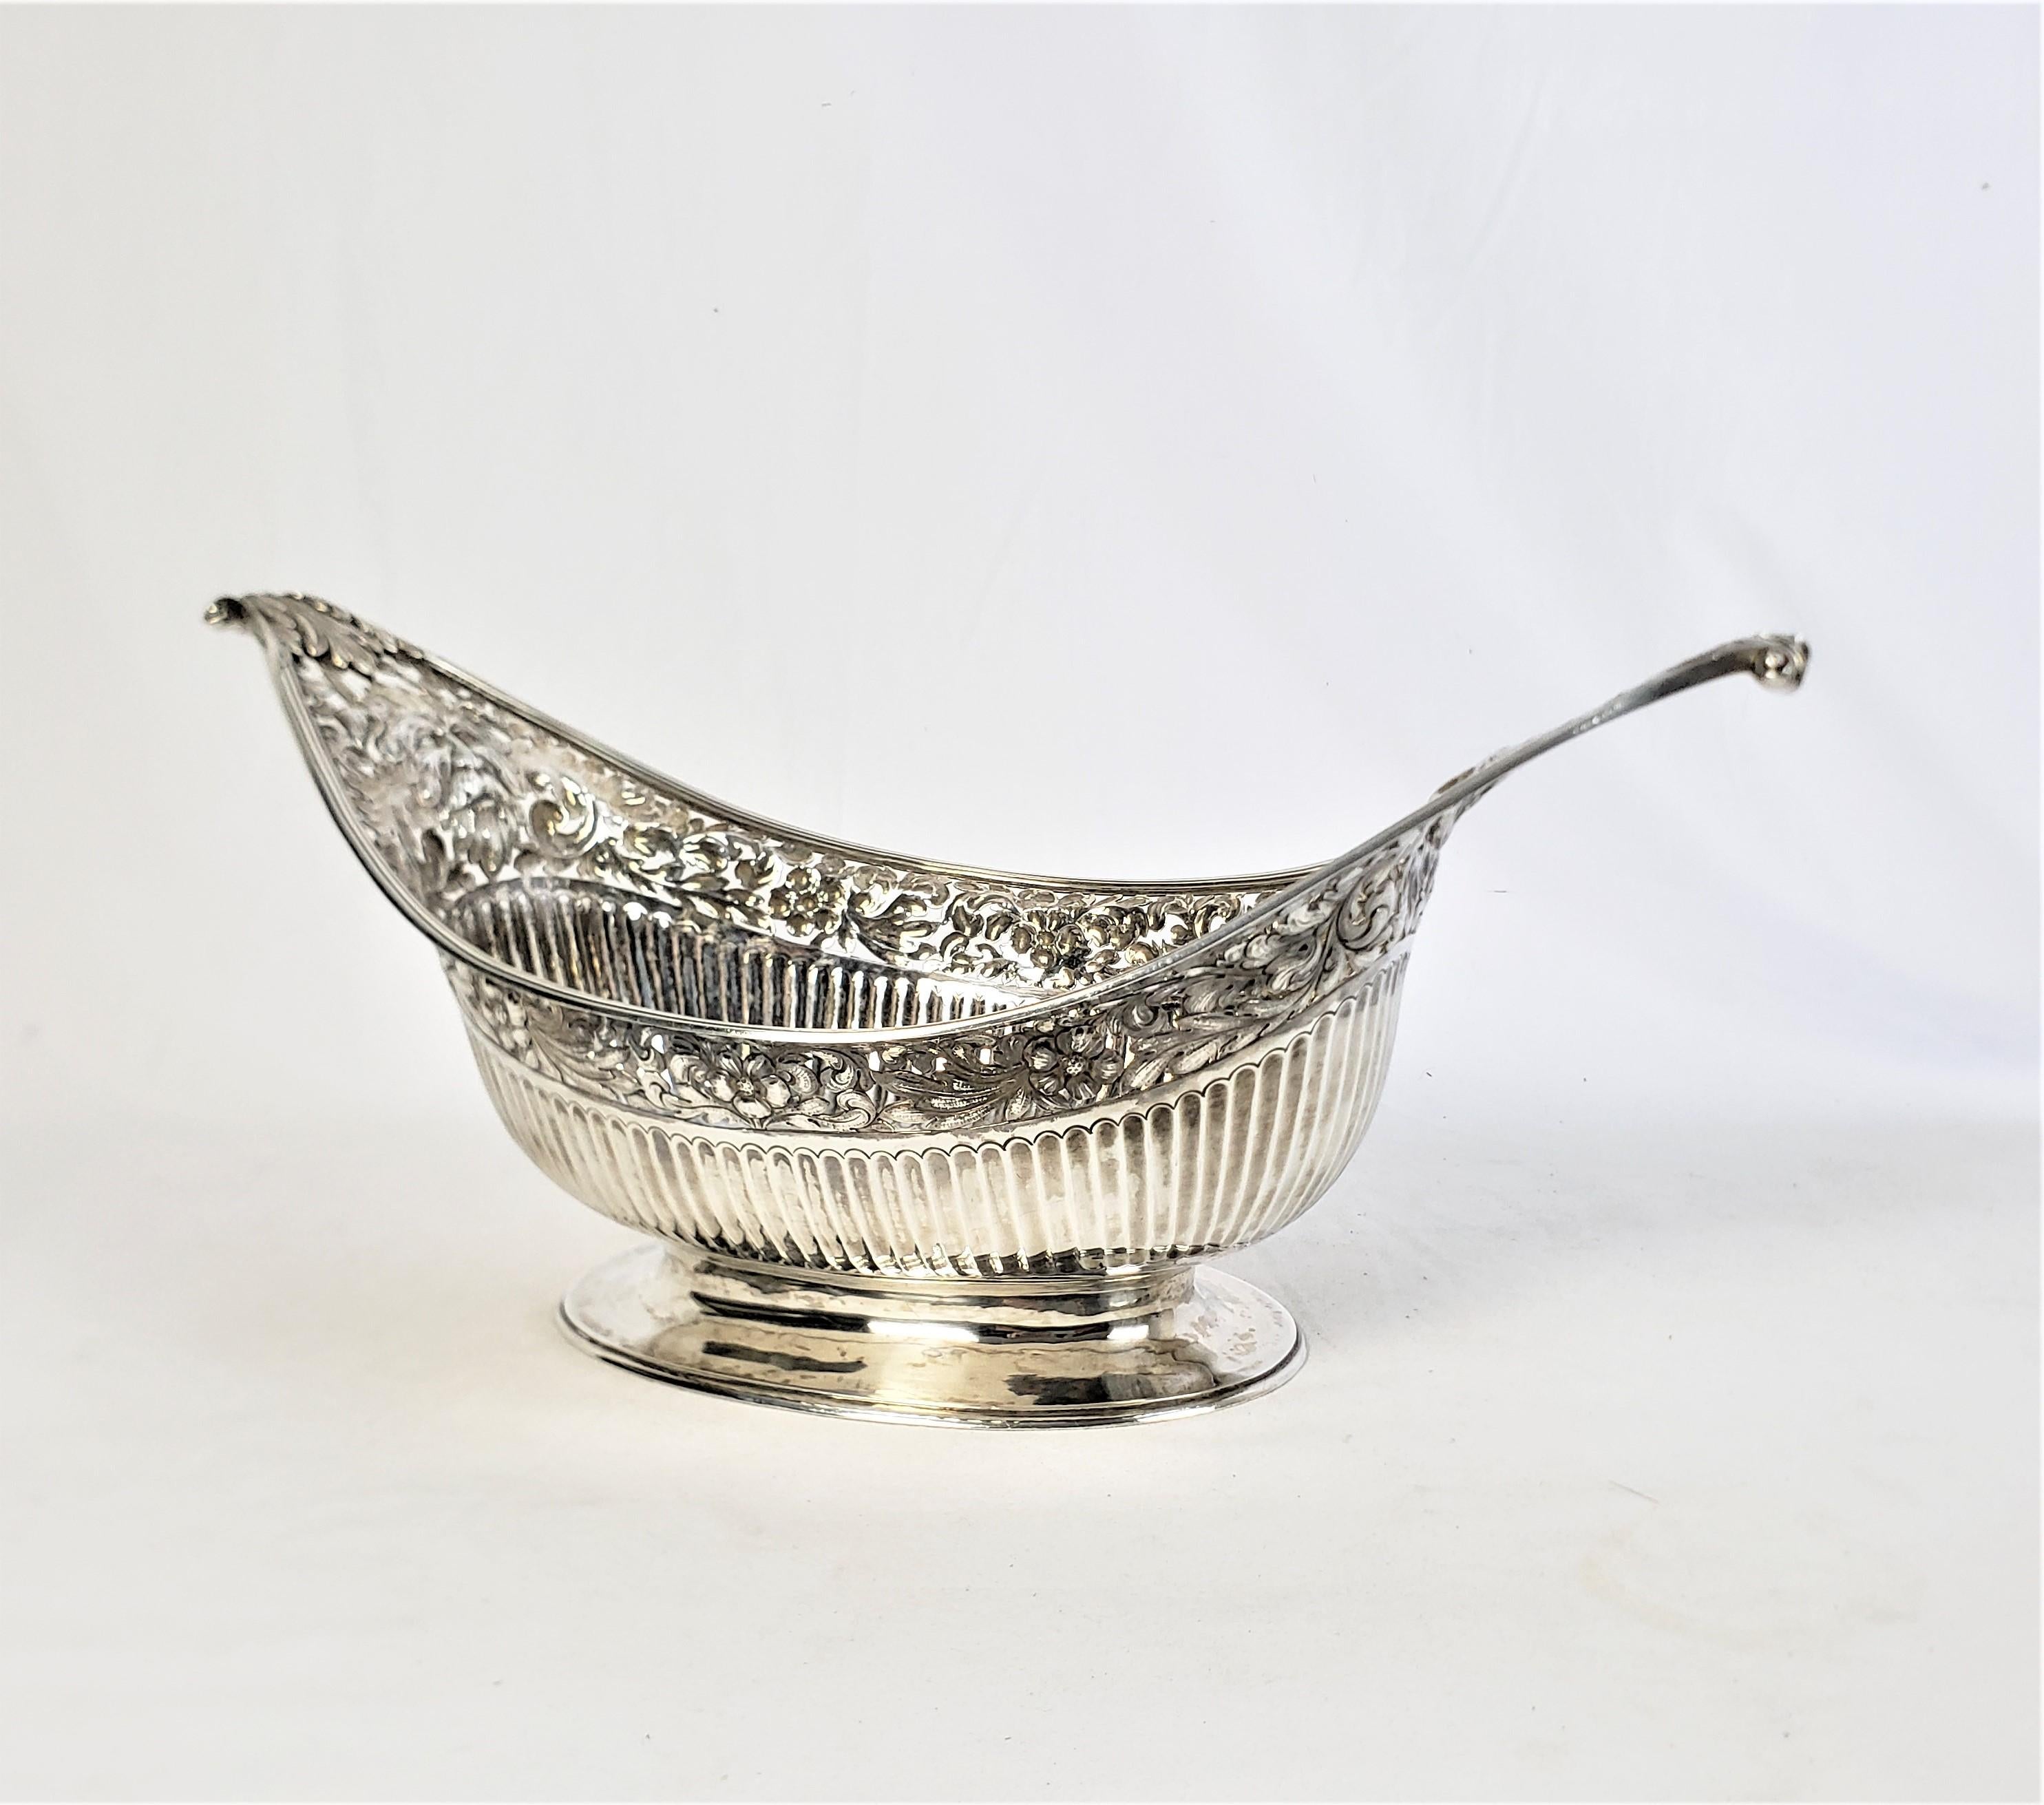 This large and substantial centerpiece basket was made by Timothy Renou of England in 1802 and done in the period Georgian style. The basket is composed of sterling silver and is eliptical in shade with high sweeping handles and ribbed sides. The